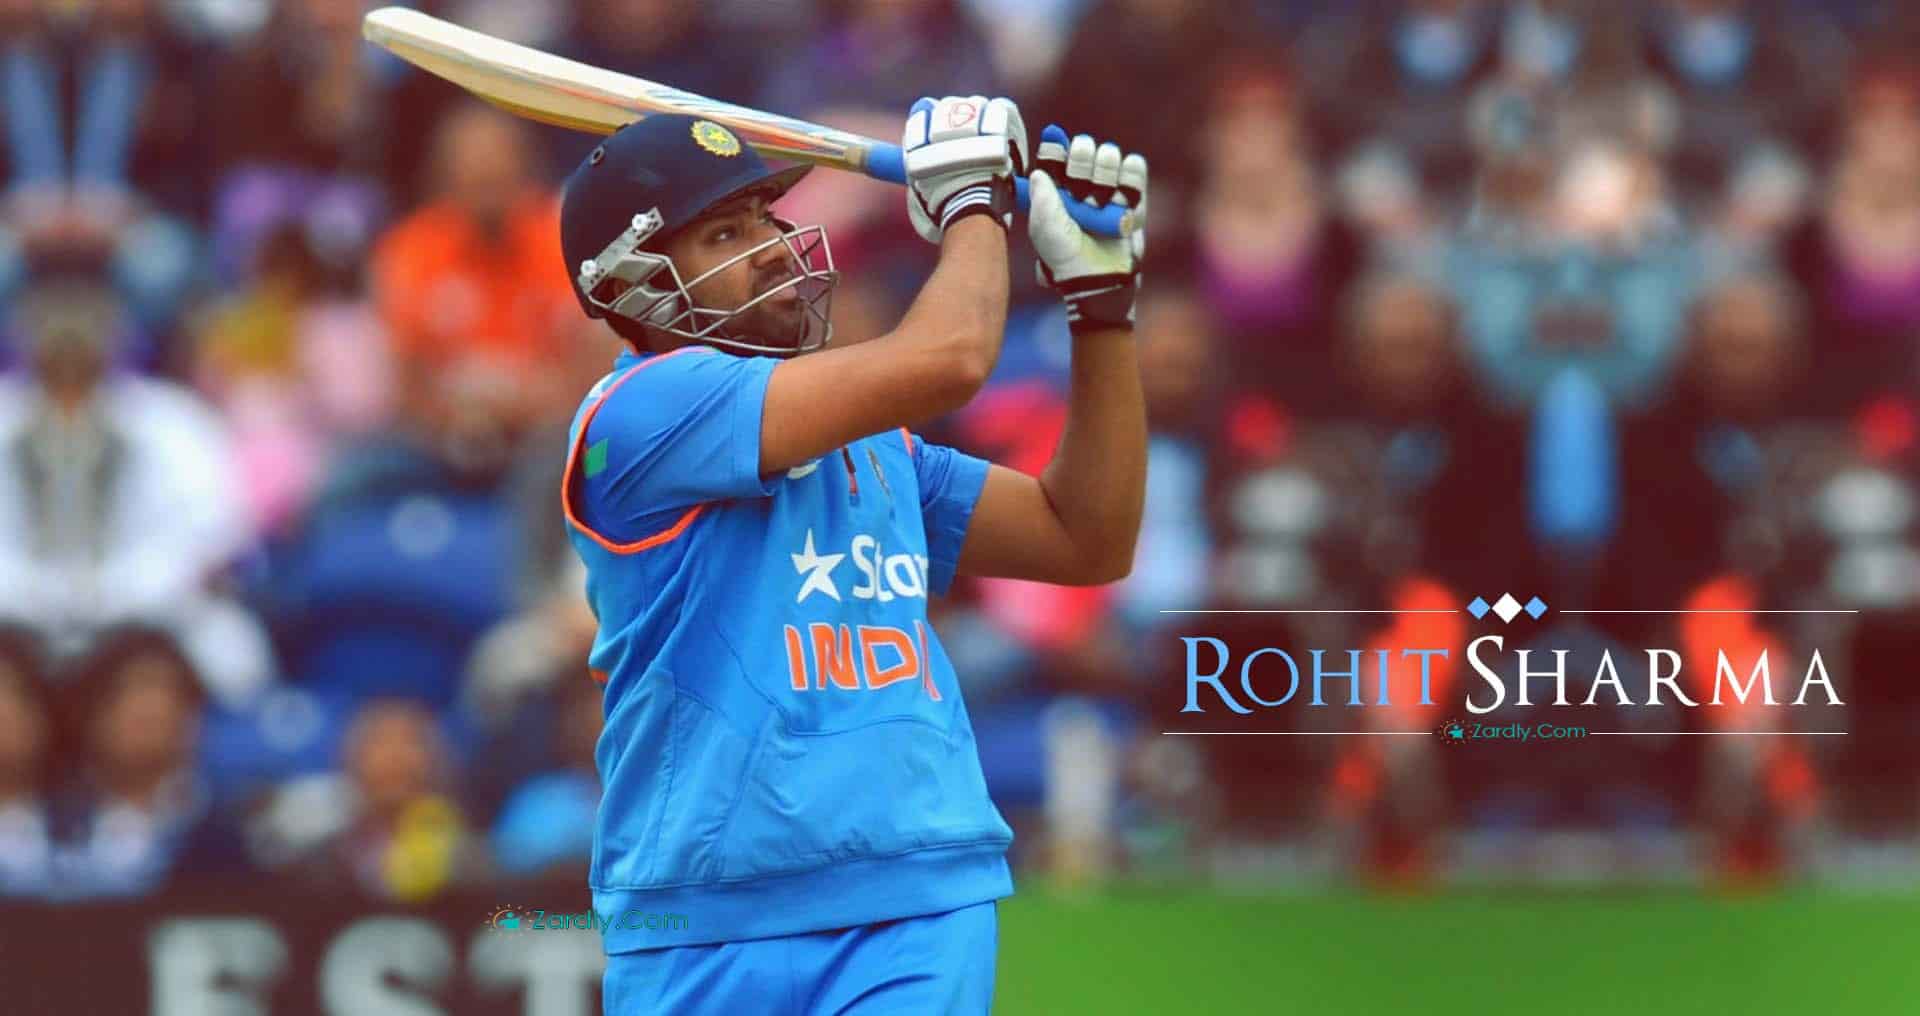 Rohit Sharma Best Top HD Wallpaper And Picture 2019